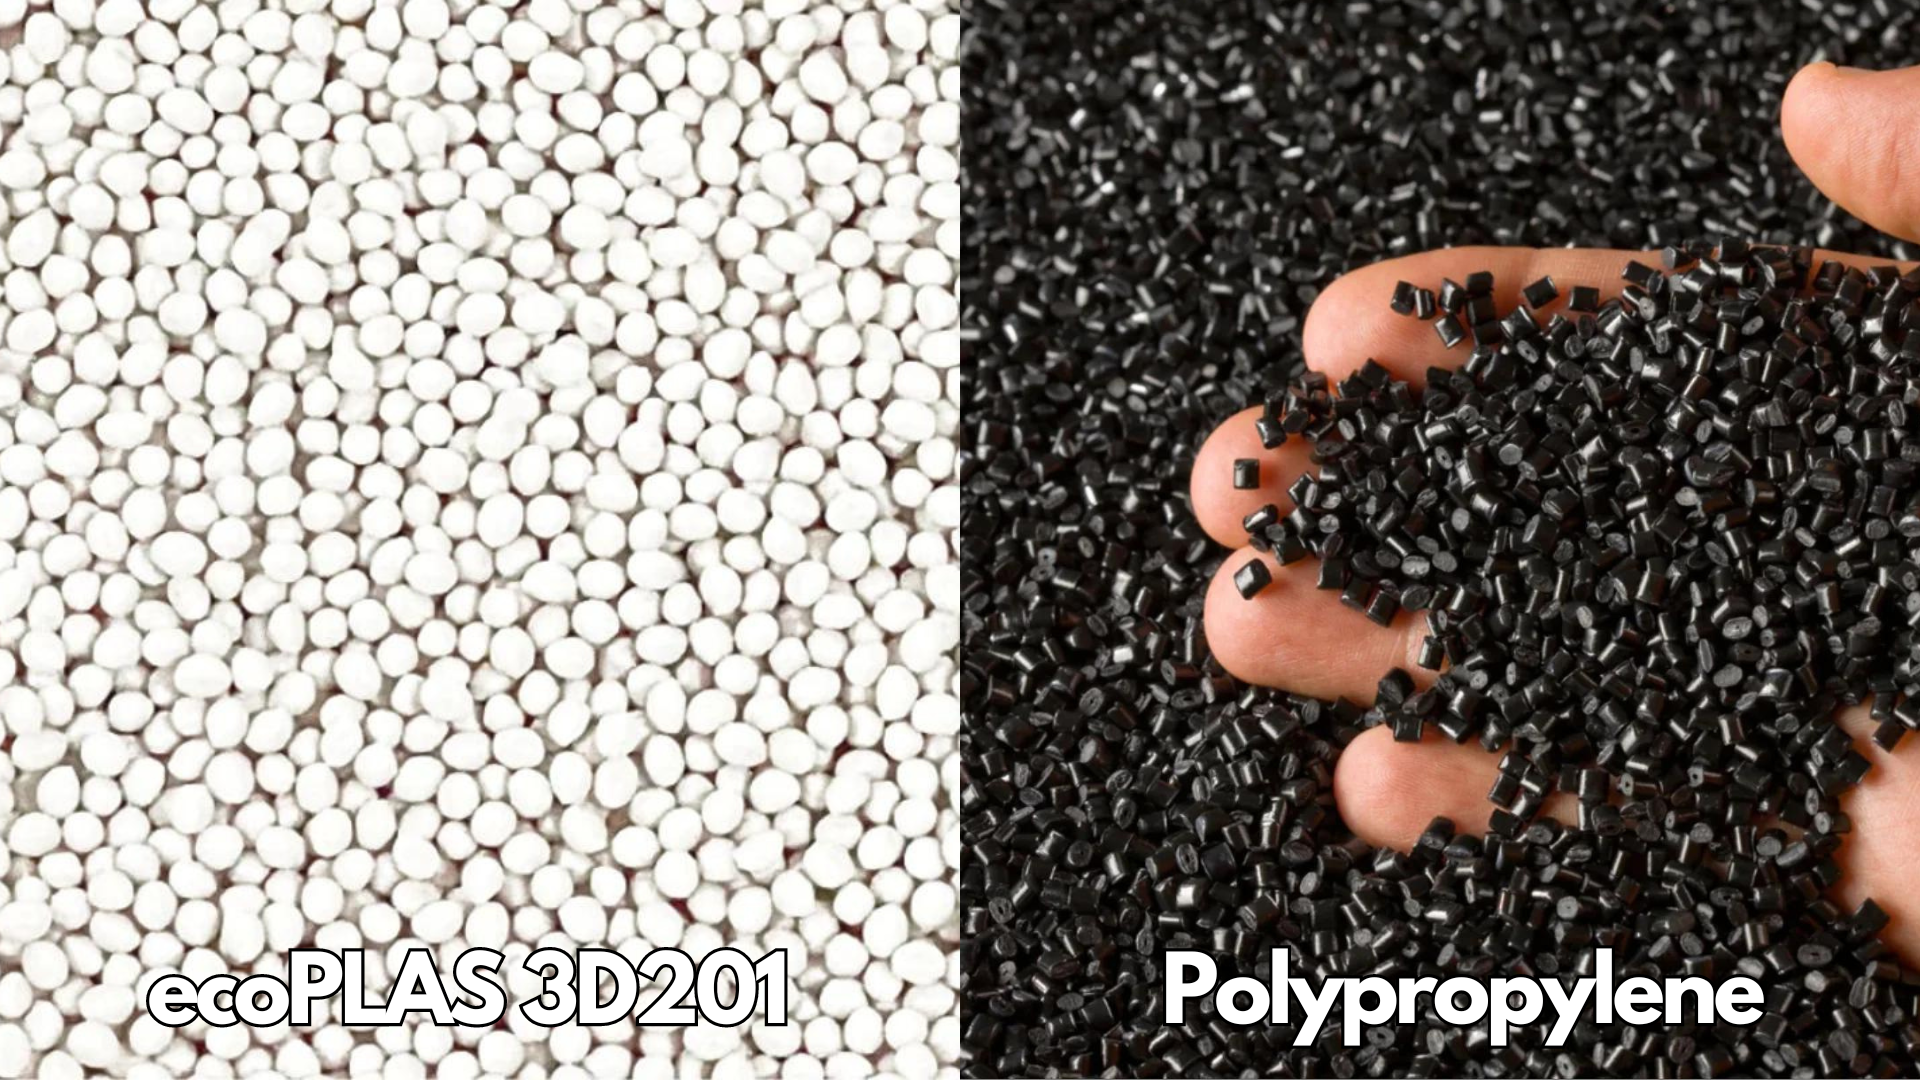 New Material Options for Large Format Additive 3D Printing